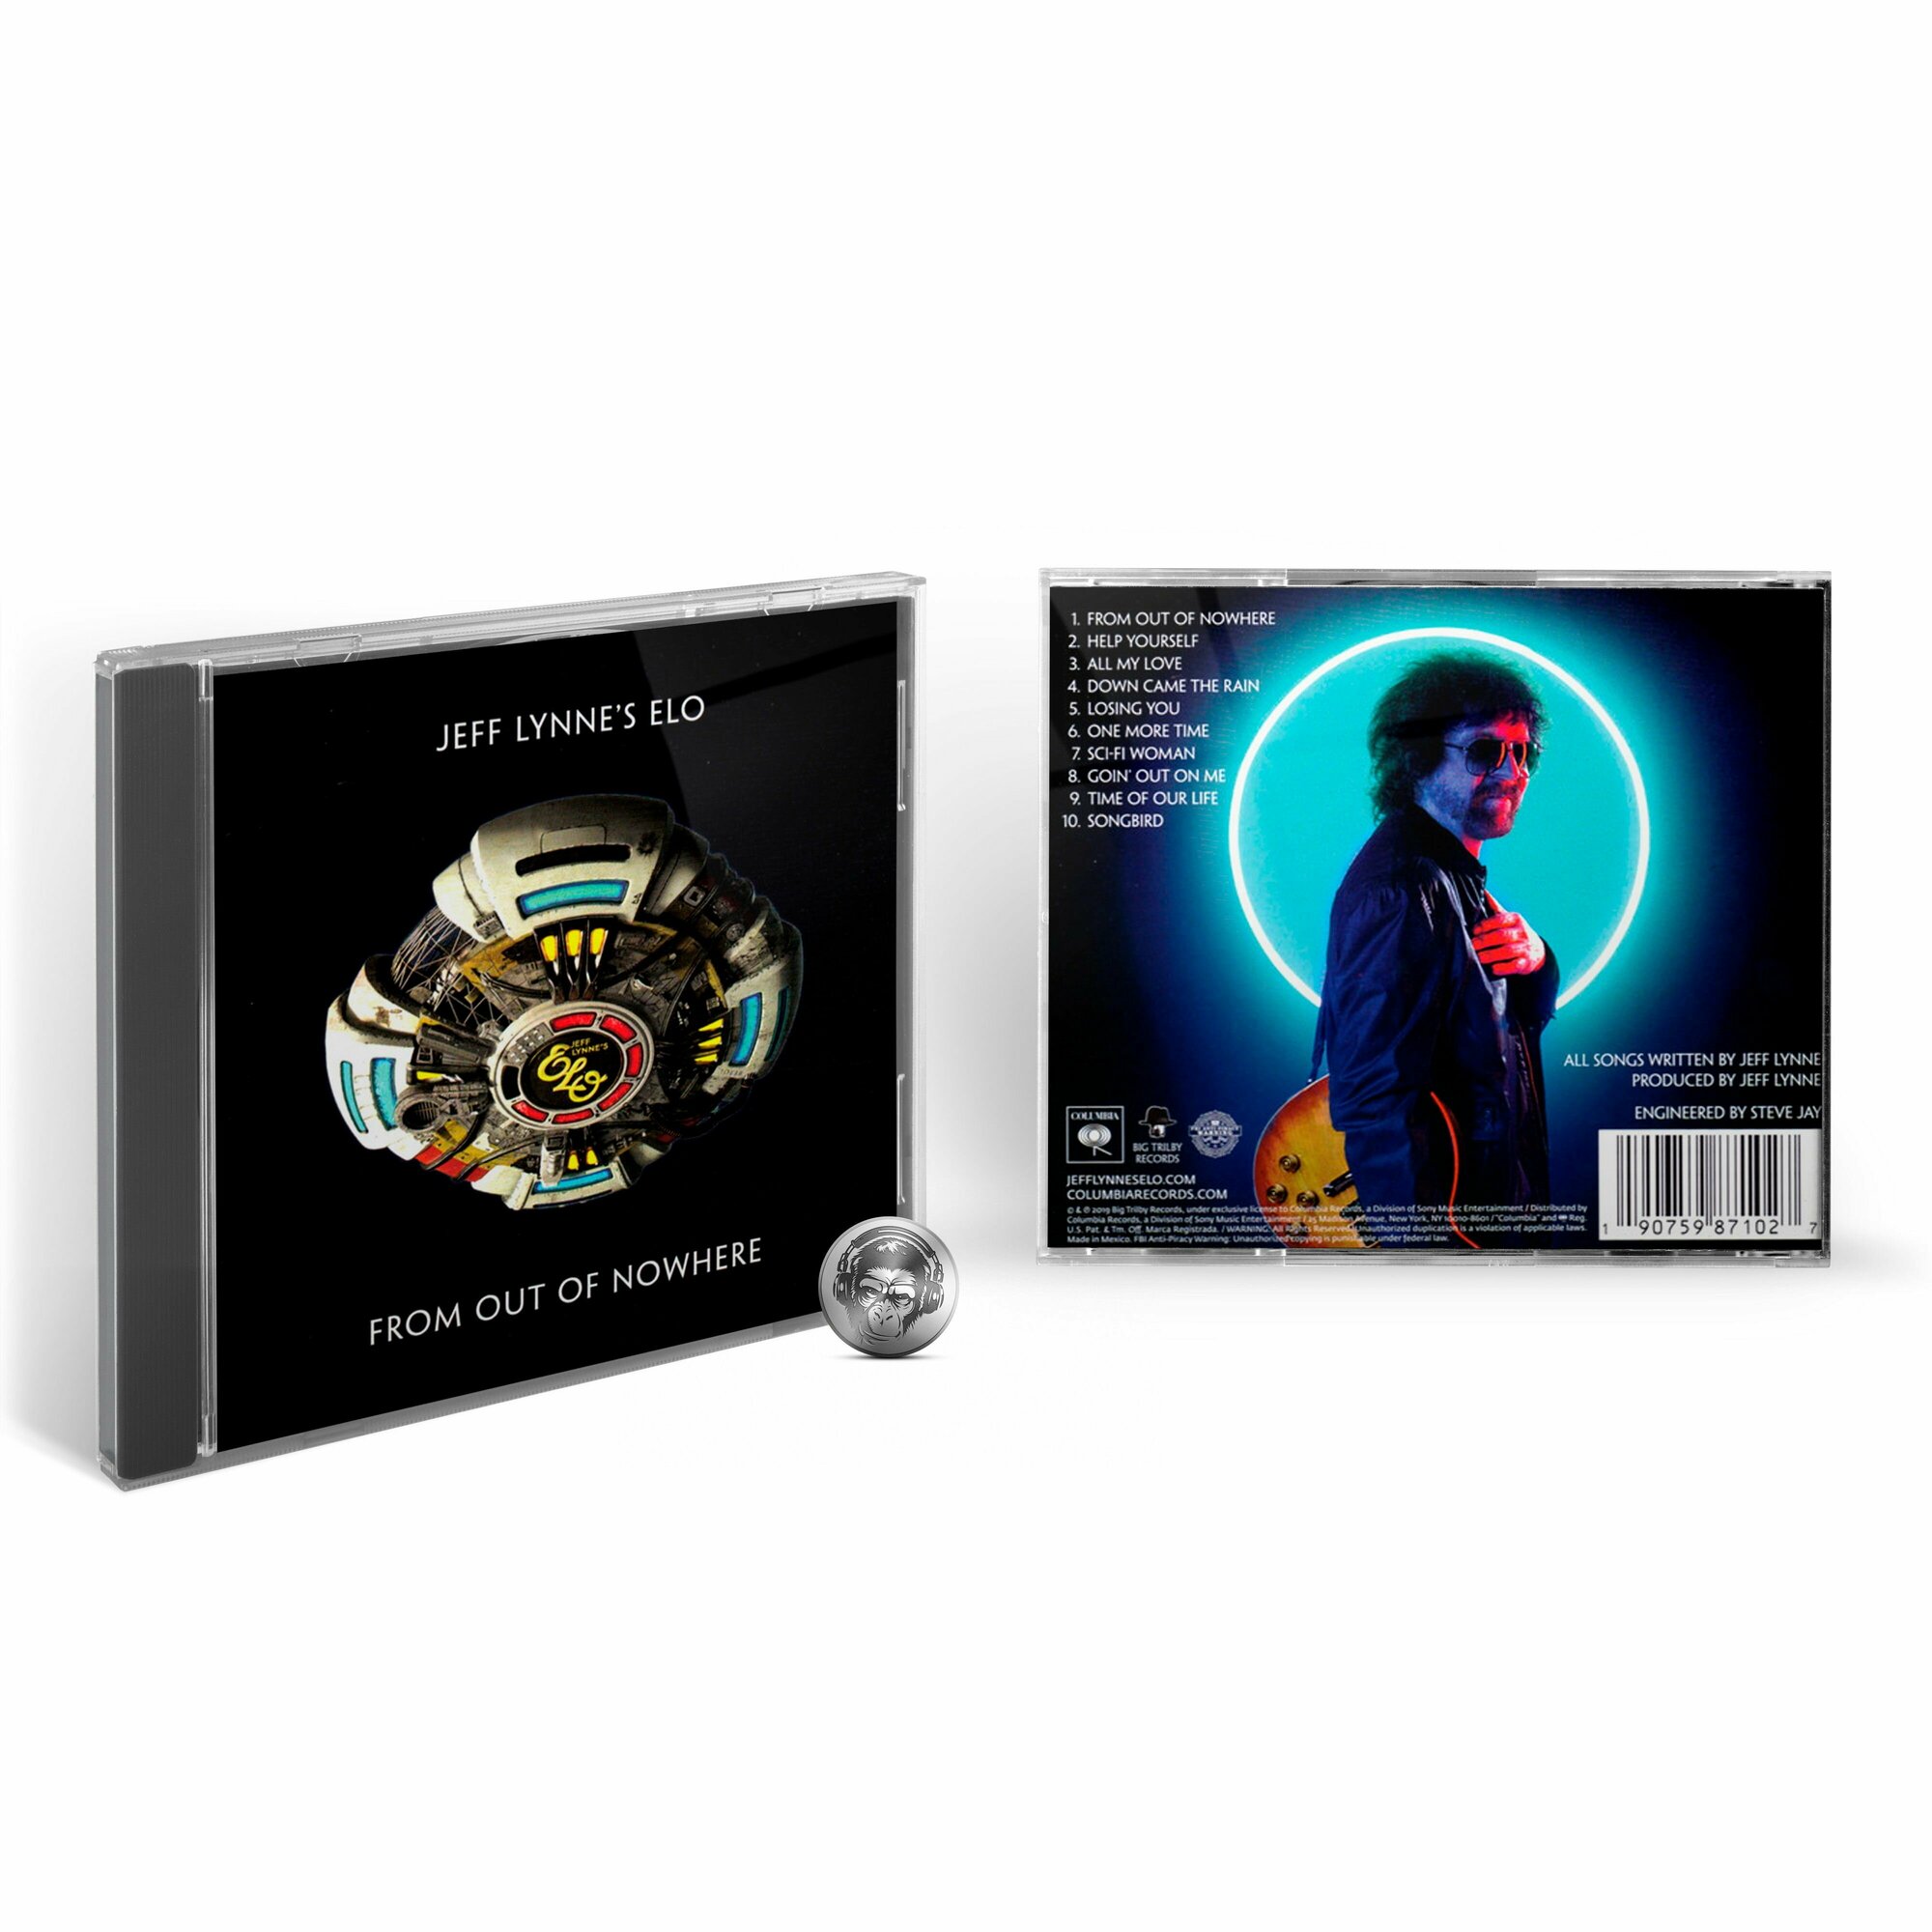 Jeff Lynne's ELO - From Out Of Nowhere (1CD) 2019 Jewel Аудио диск